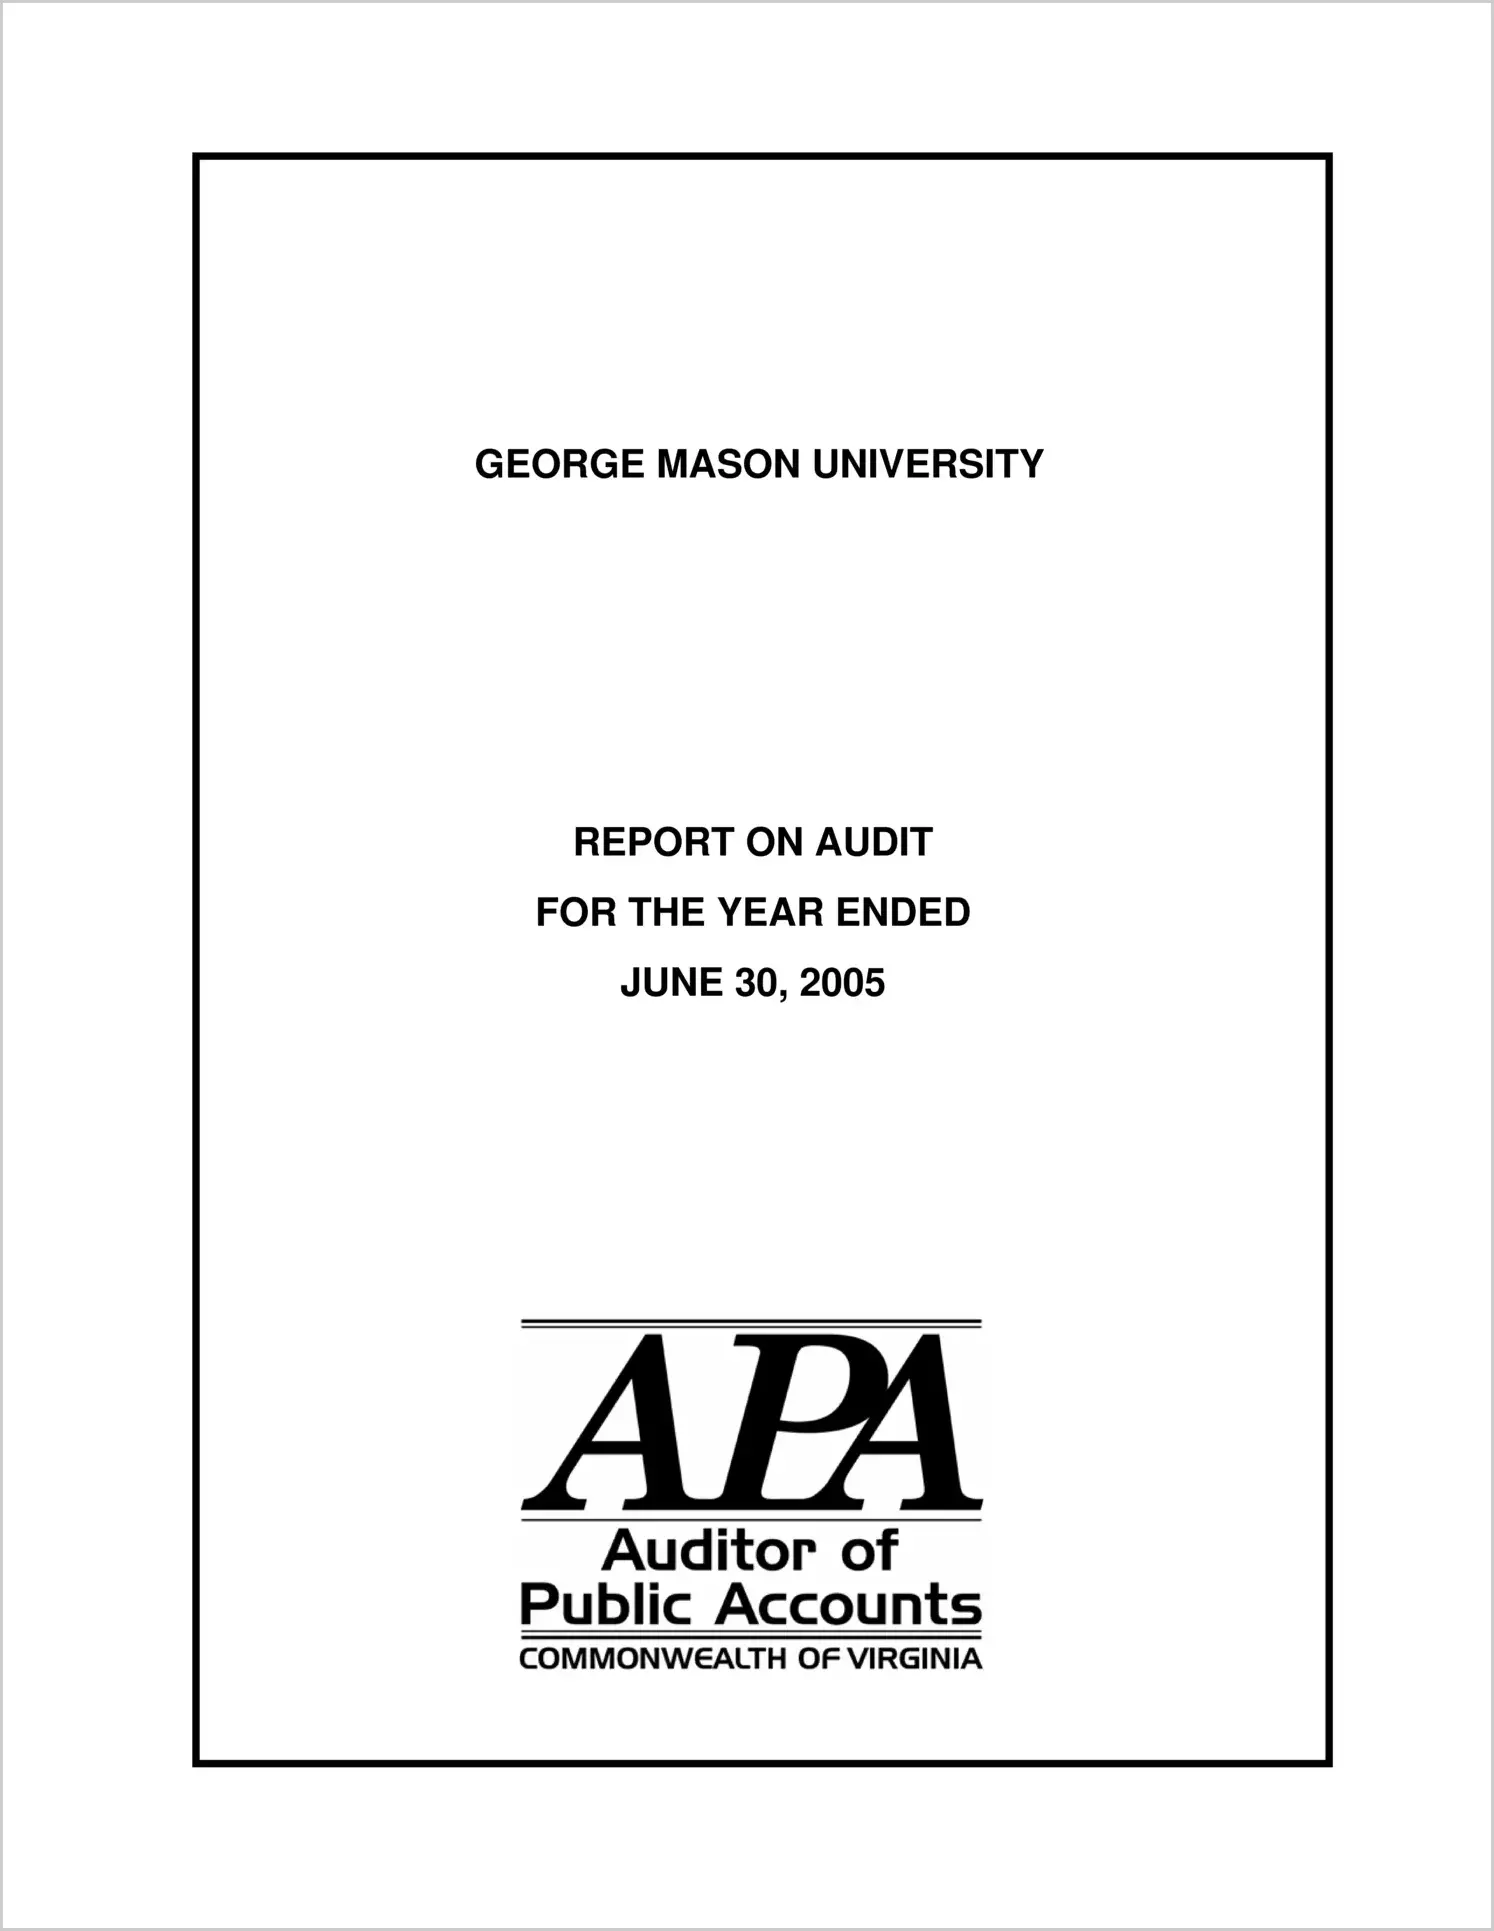 George Mason University for the year ended June 30, 2005